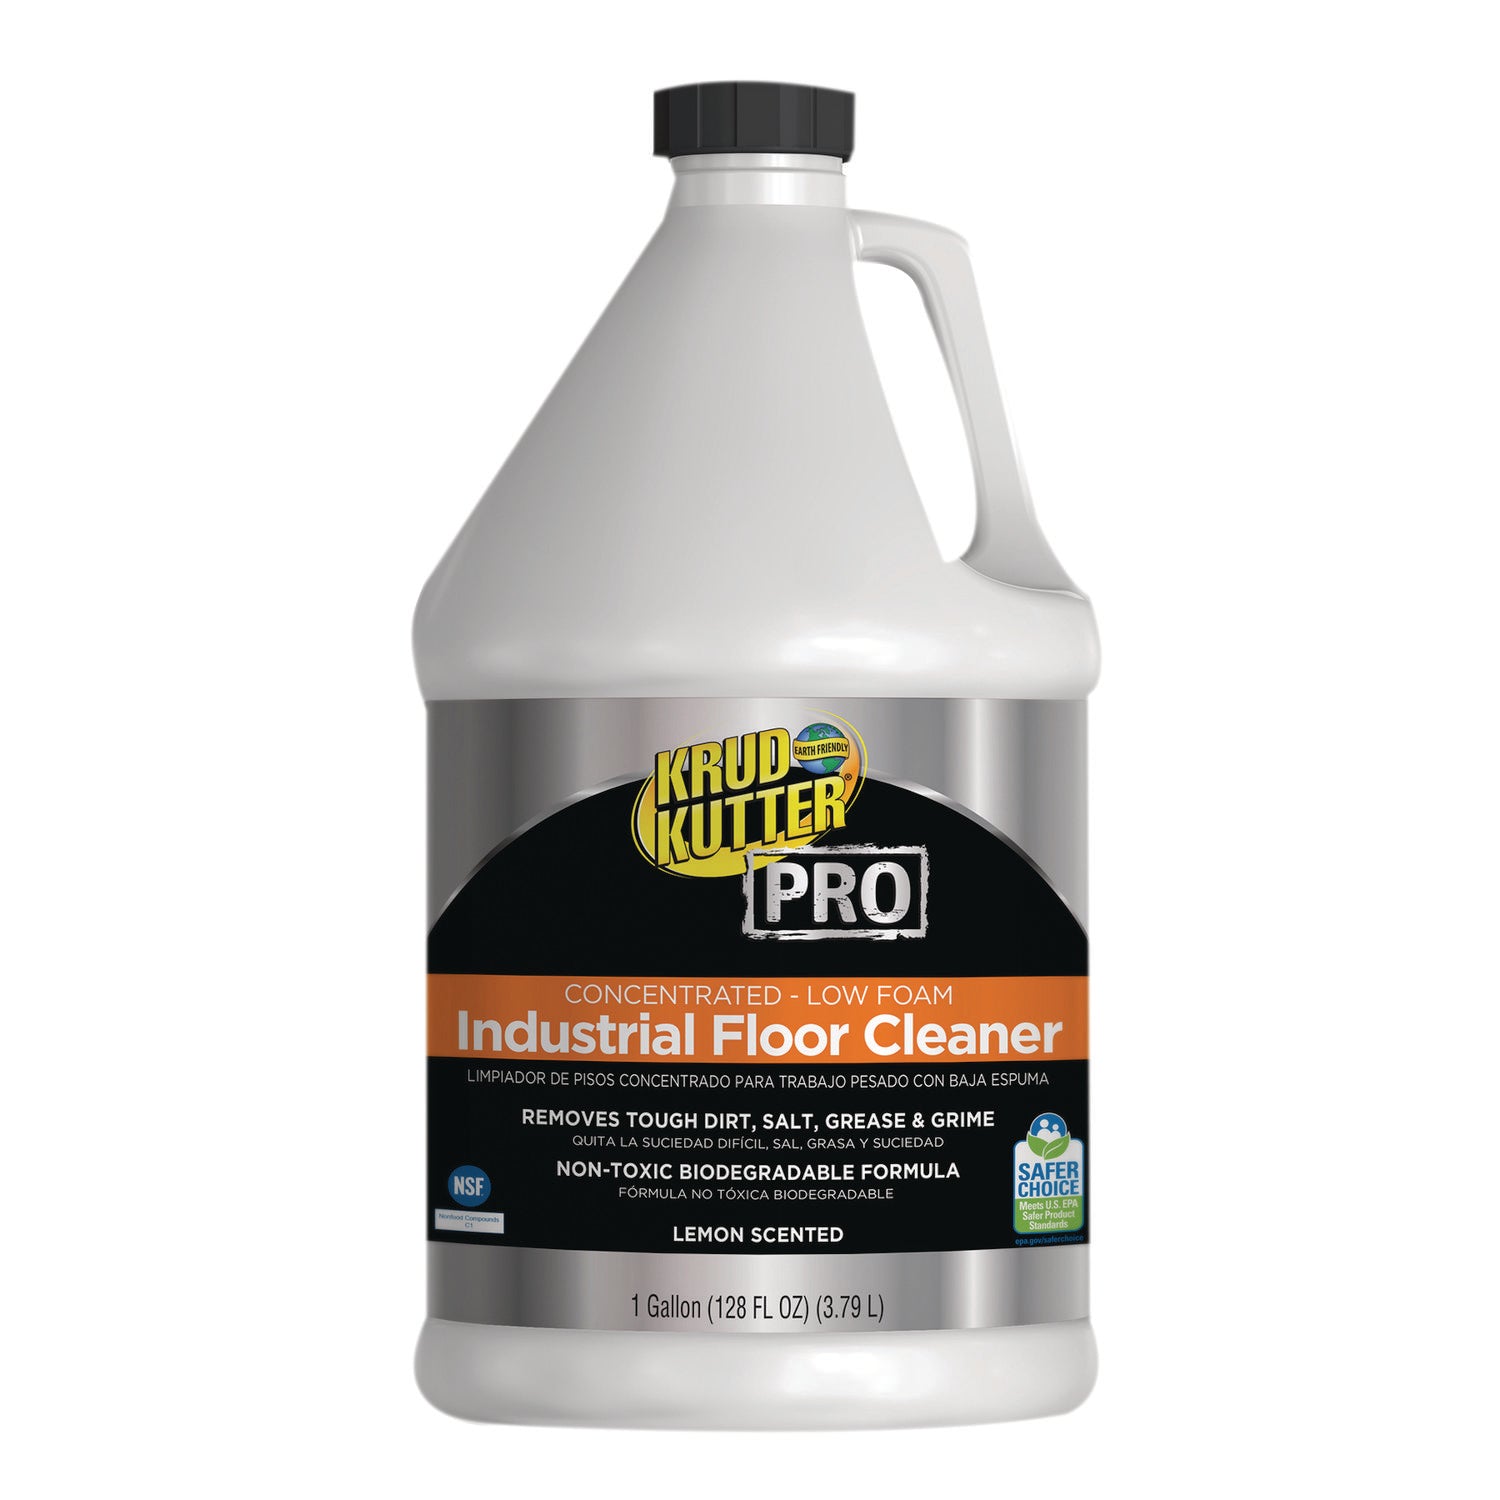 concentrated-low-foam-industrial-floor-cleaner-lemon-scent-1-gal-bottle-4-carton_rst382263 - 1